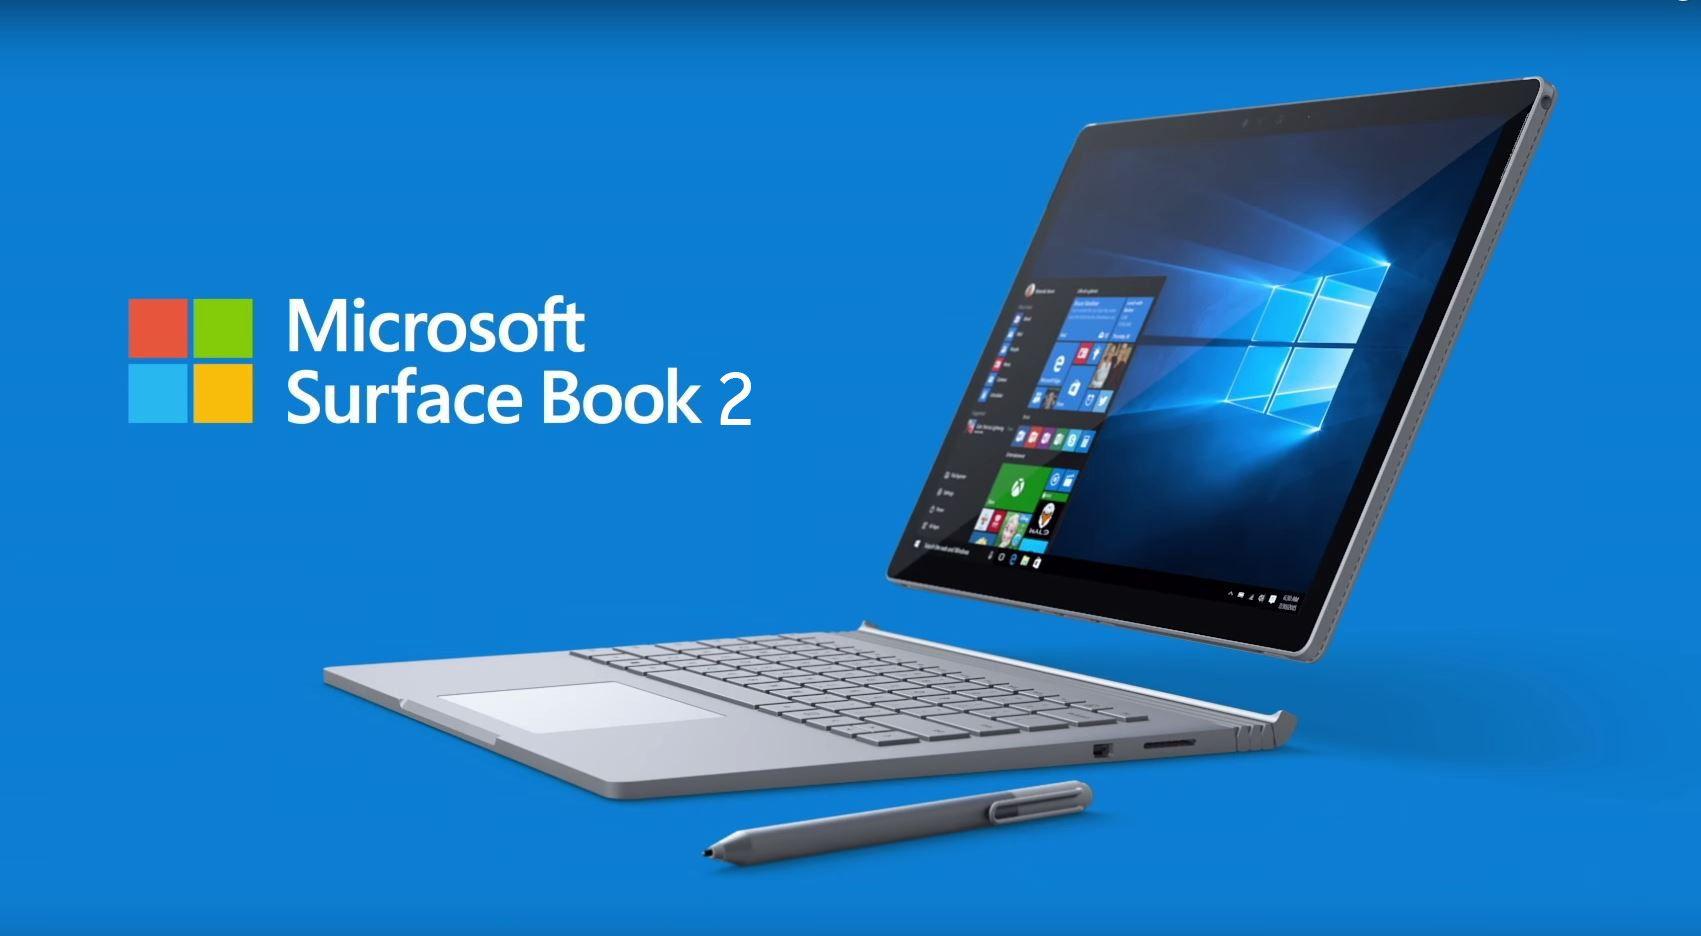 Microsoft Surface 2 Logo - Microsoft Launches its Second Generation of Surface Book Laptops